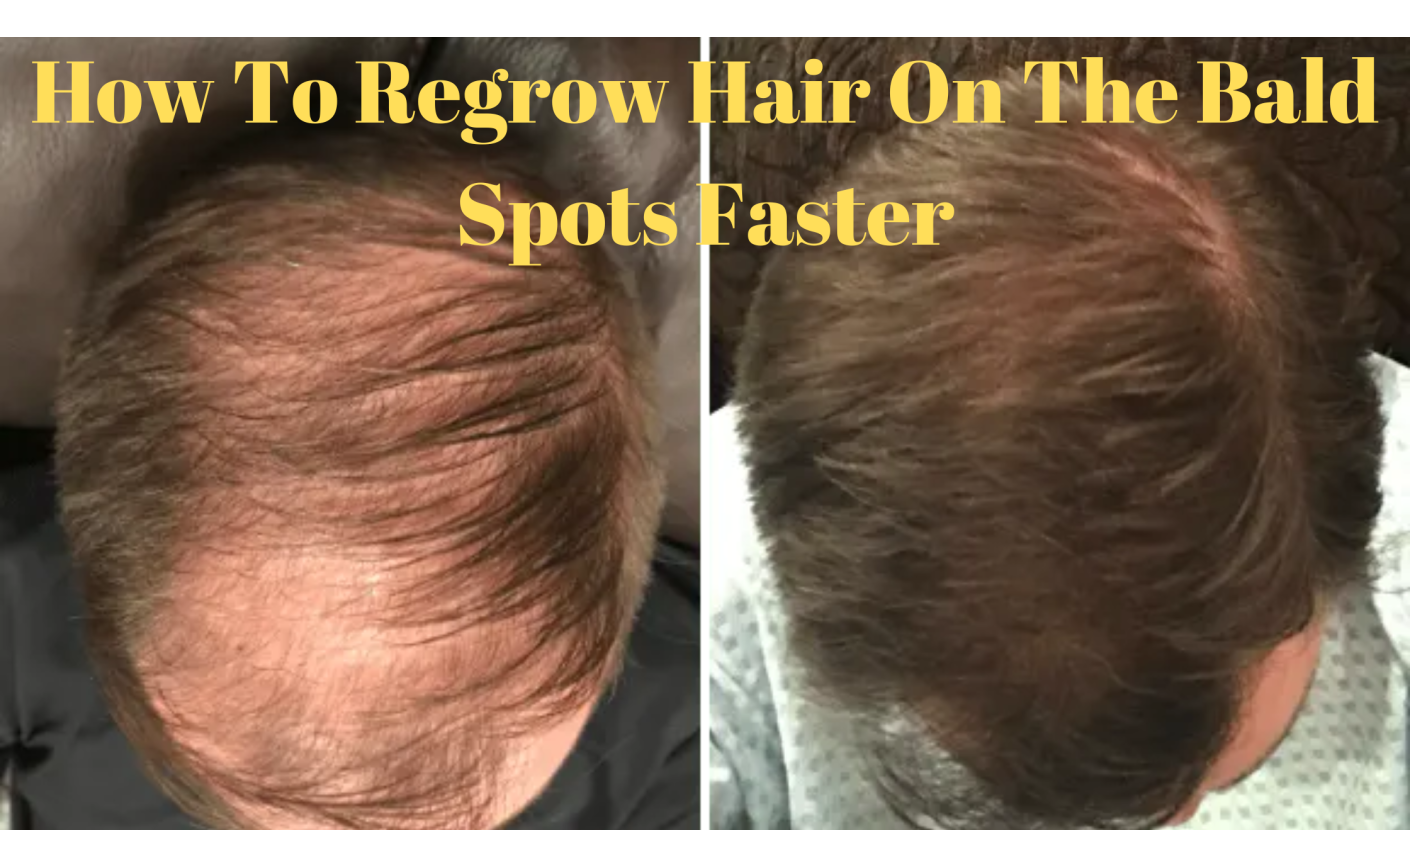 How To Regrow Hair On The Bald Spots Faster?